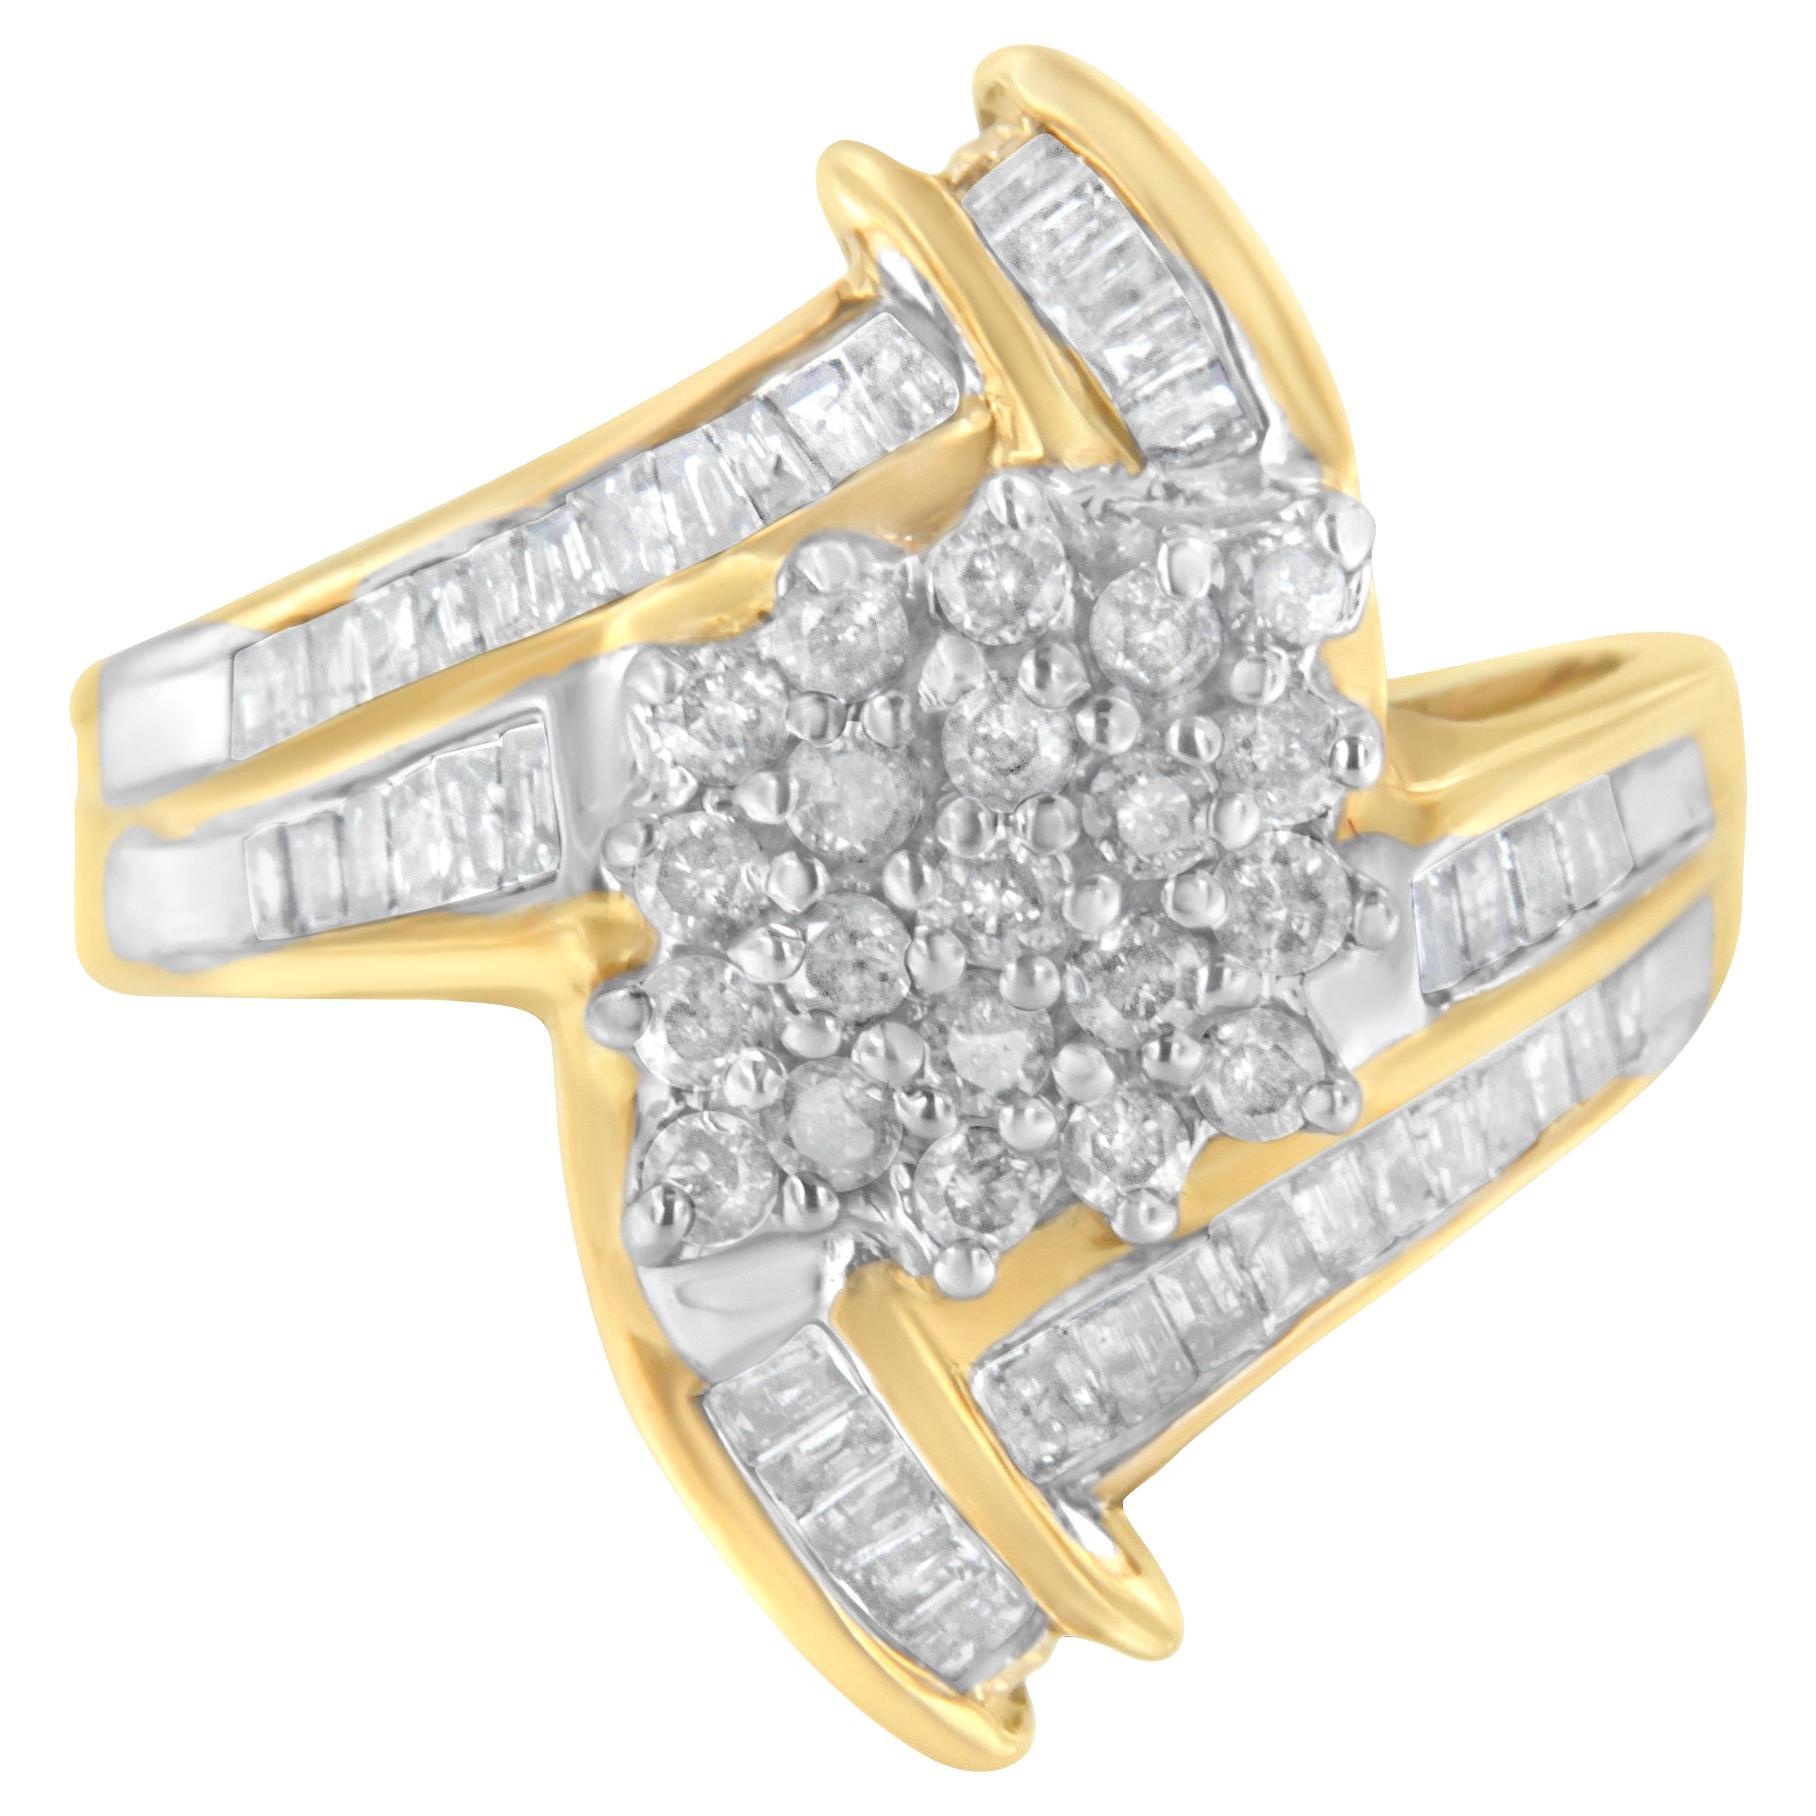 10K Yellow Gold 1.0 Carat Round and Baguette-Cut Diamond Bypass Cluster Ring